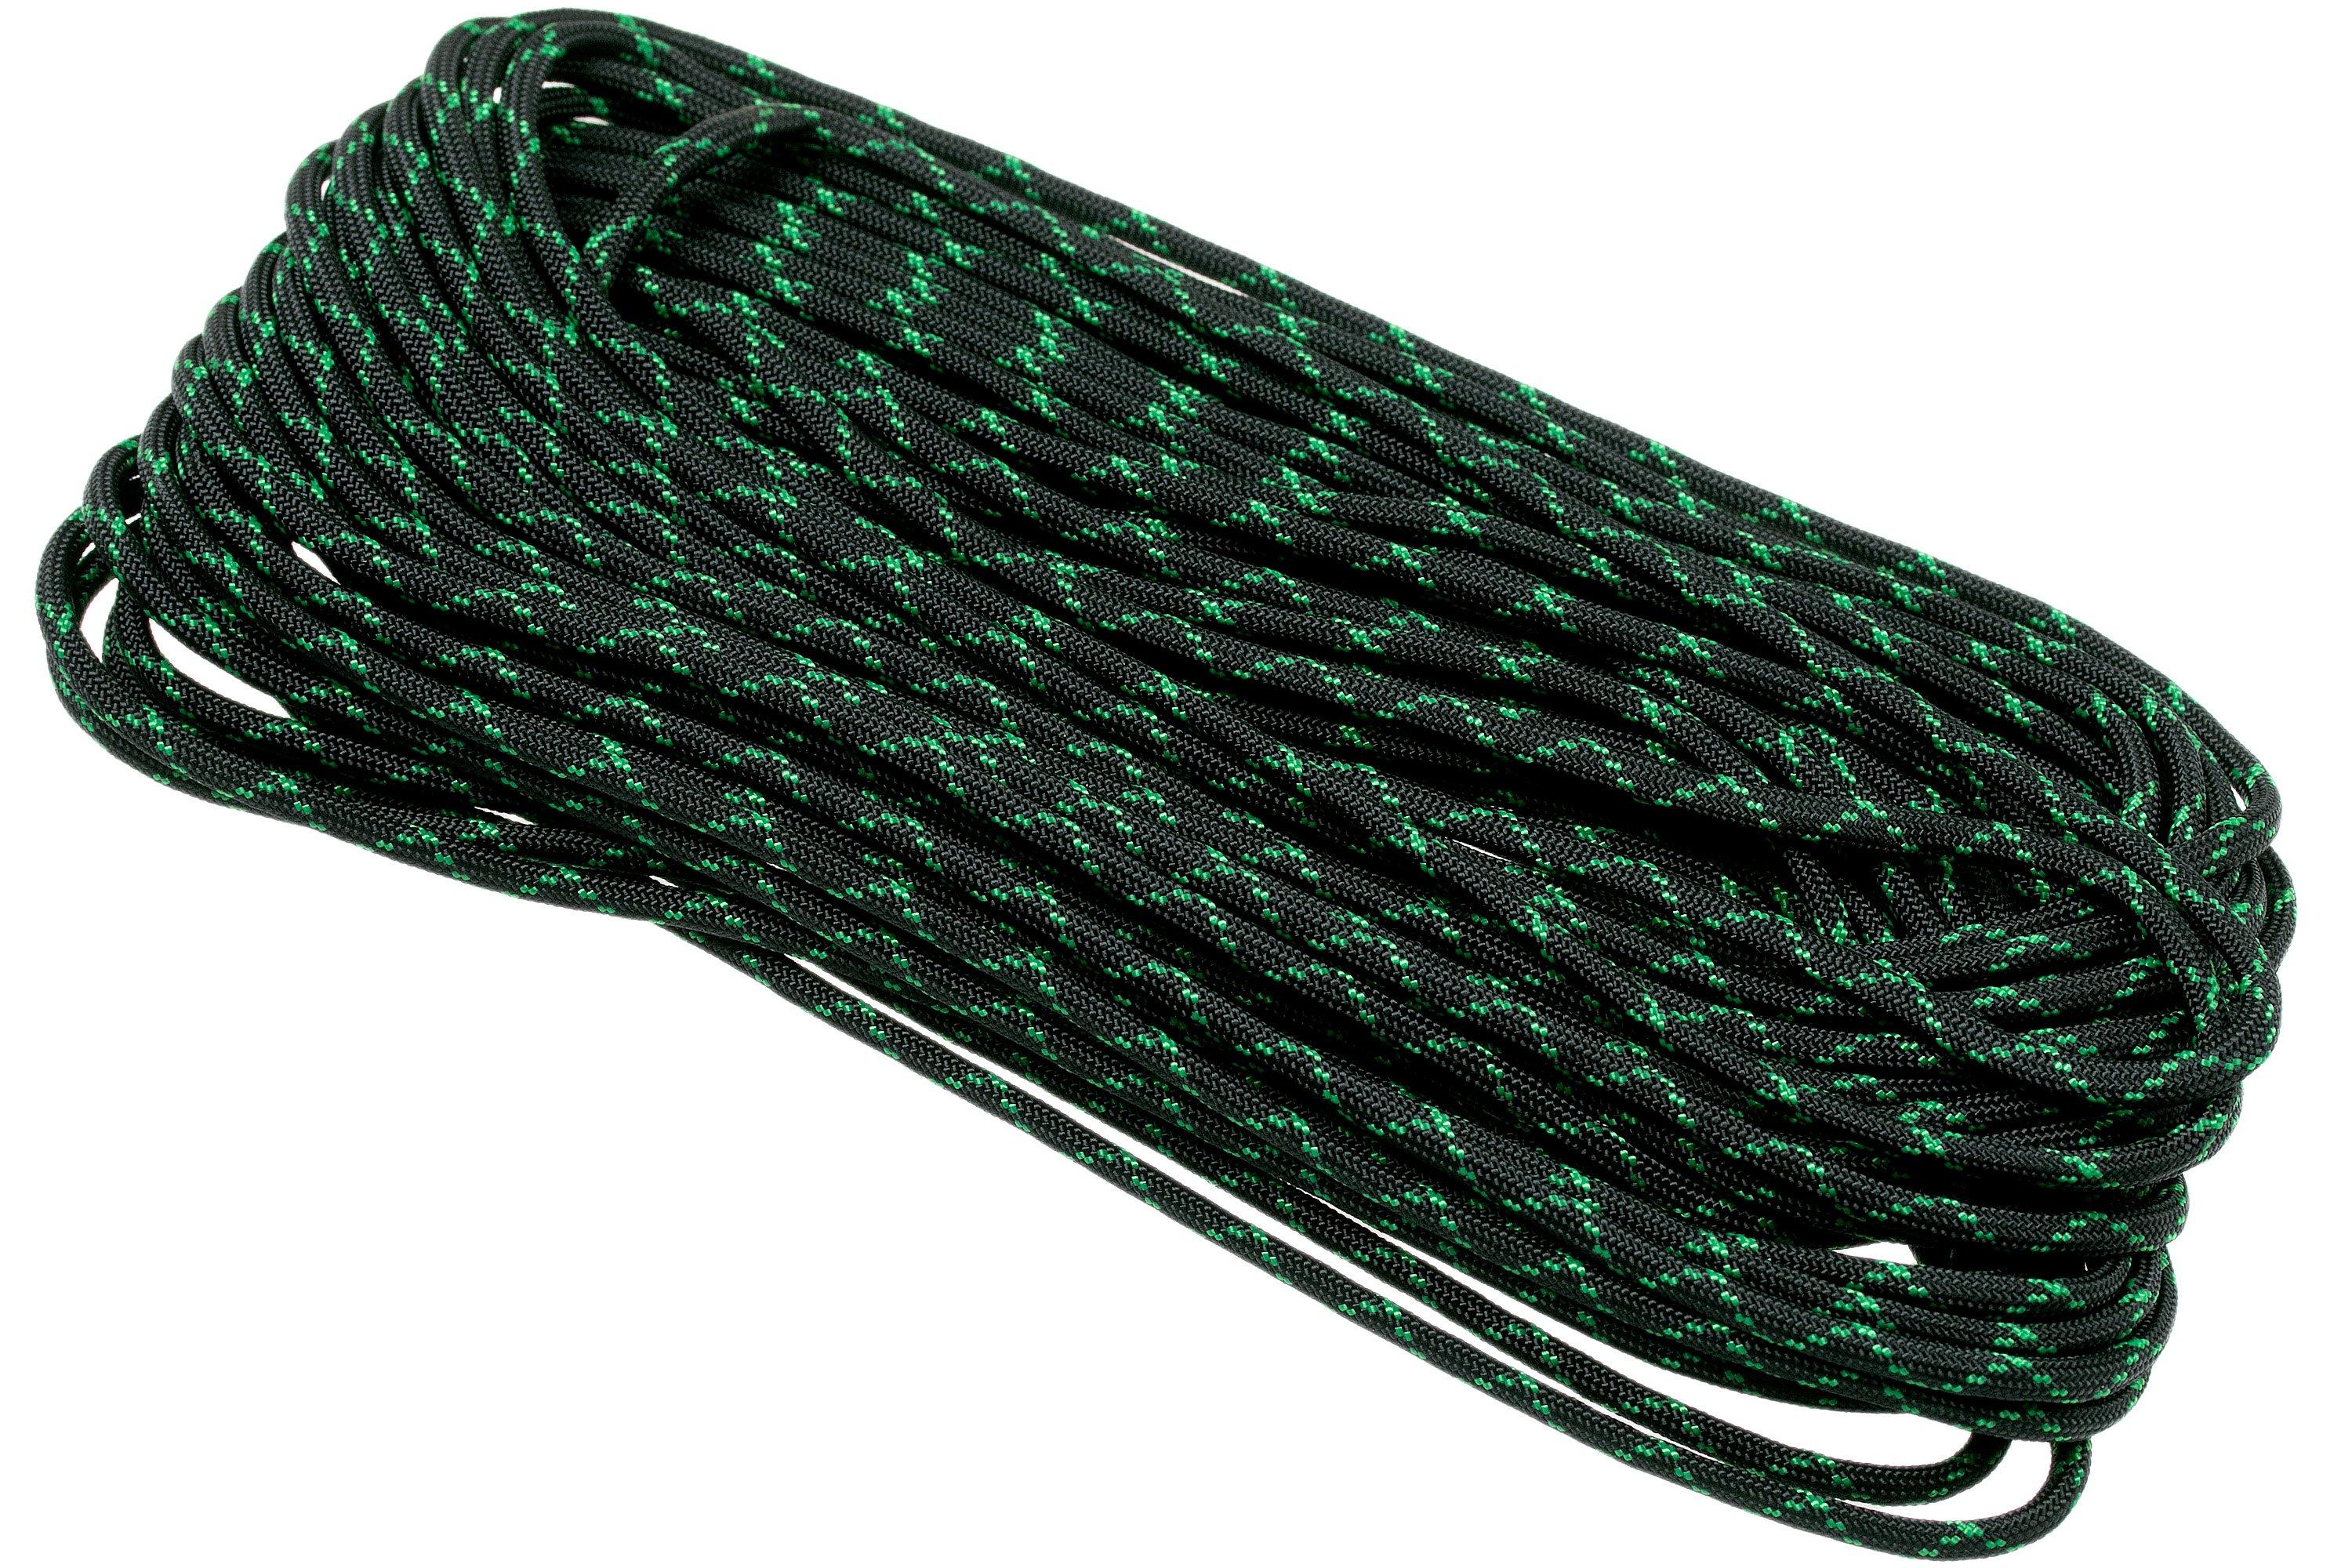 Knivesandtools 550 paracord type III, colour: black with kelly green X - 50  ft (15.24 meters)